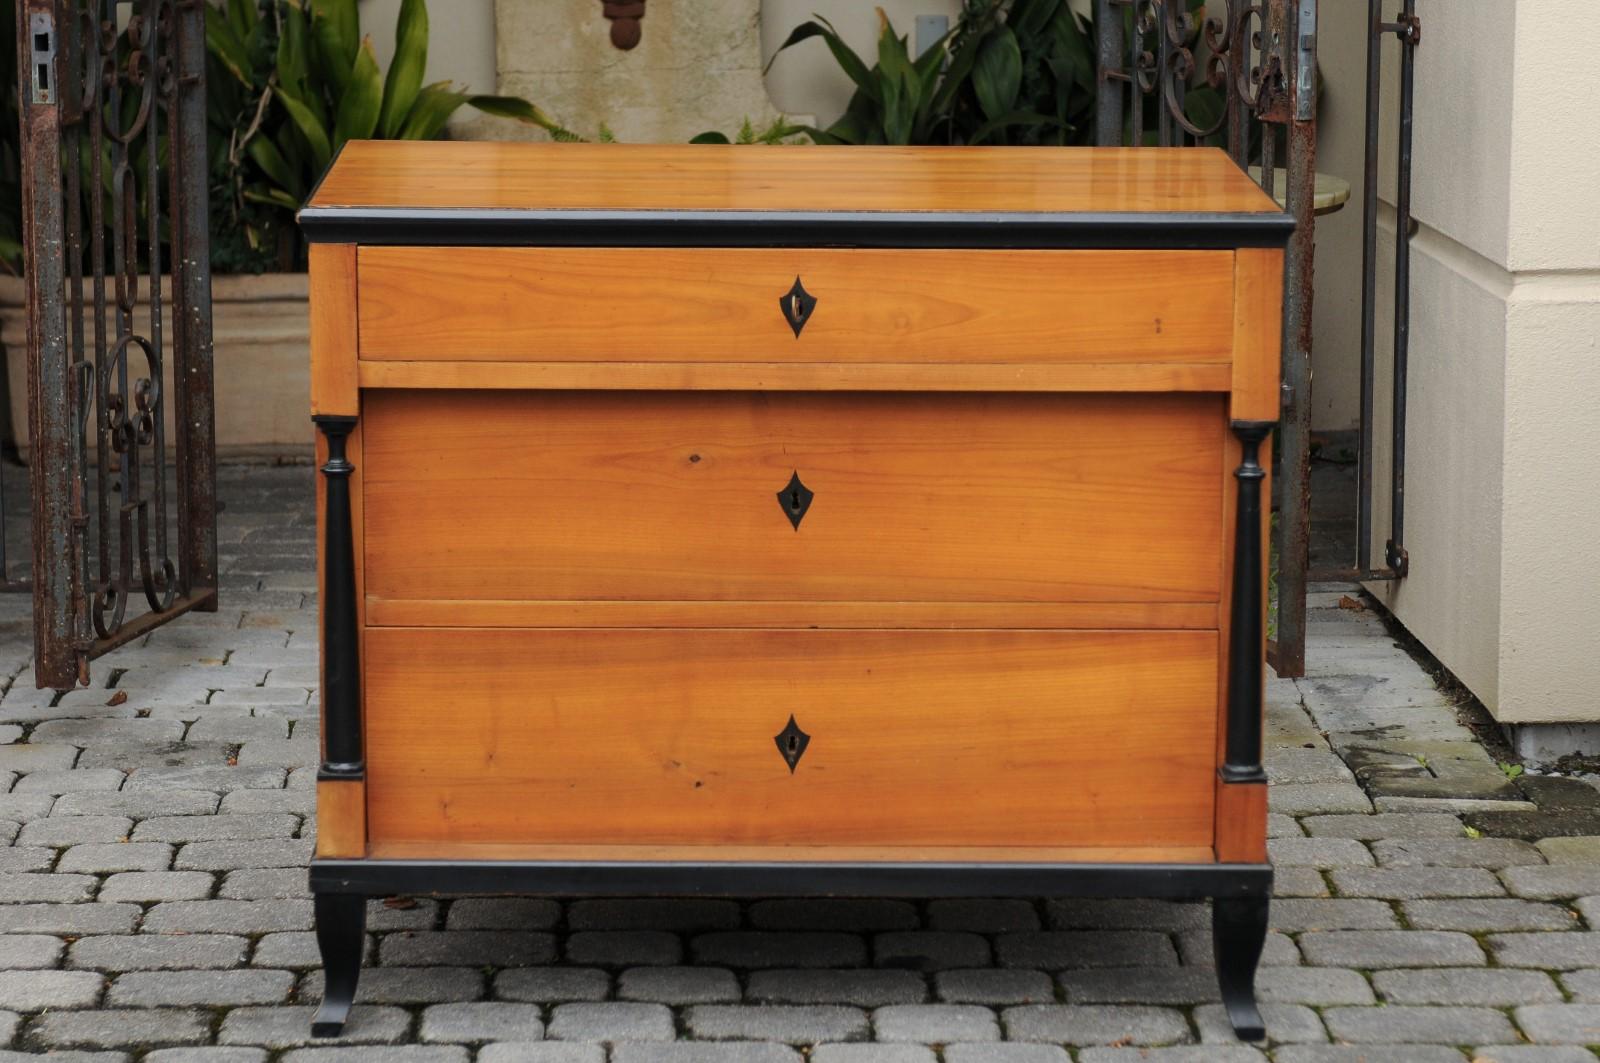 A German Biedermeier style walnut three-drawer commode from the late 19th century, with ebonized accents and hidden drawers. Born in the later years of the 19th century, this exquisite Biedermeier style commode features a rectangular planked top